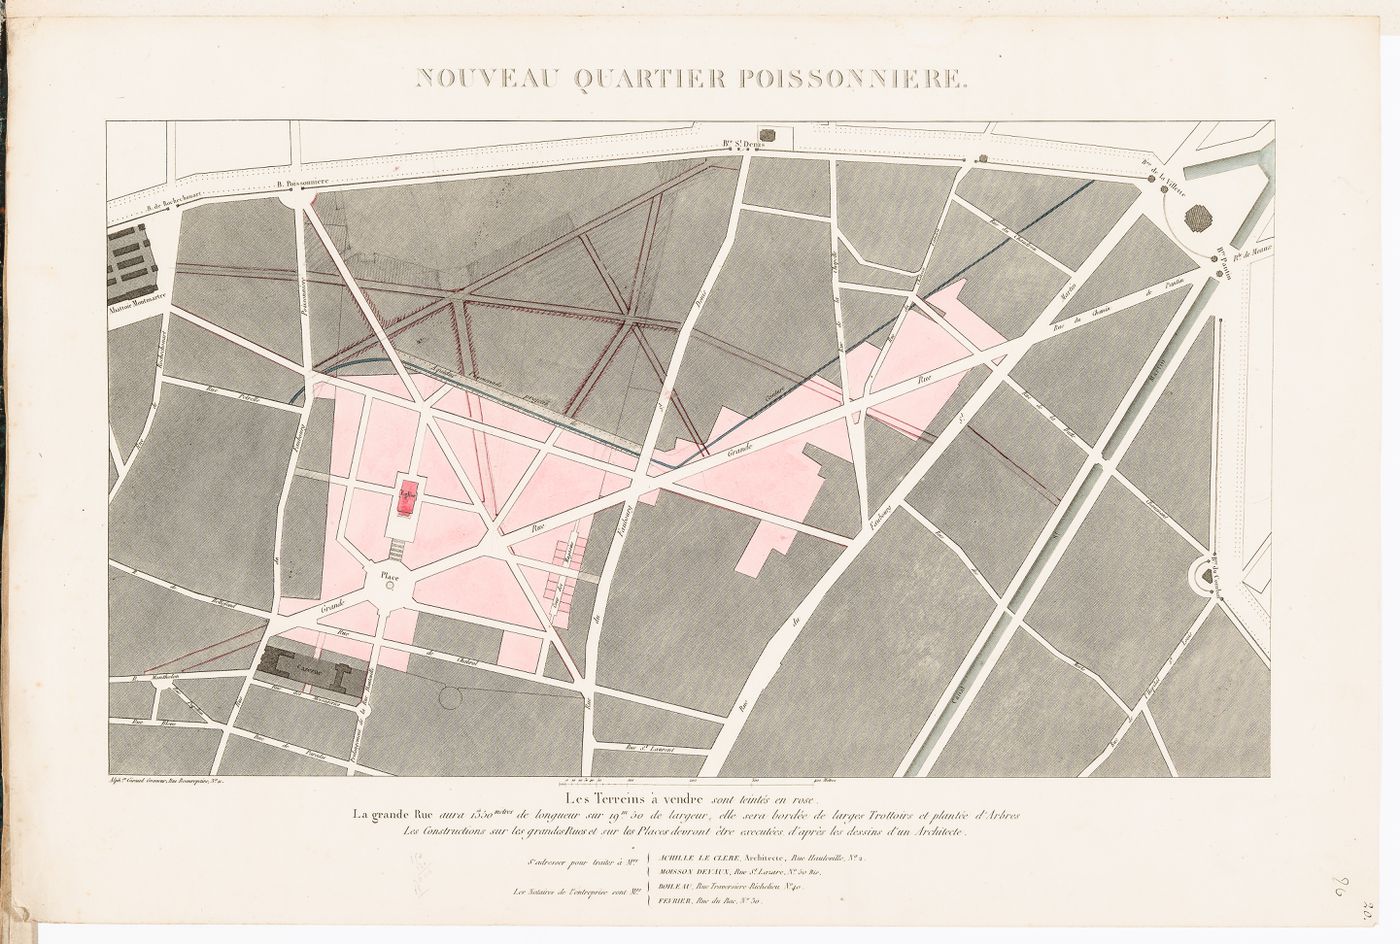 Site plan for the nouveau quartier Poissonnière showing the proposed rue La Grande, and a block plan for the horse auction house and infirmary, Clos St. Charles